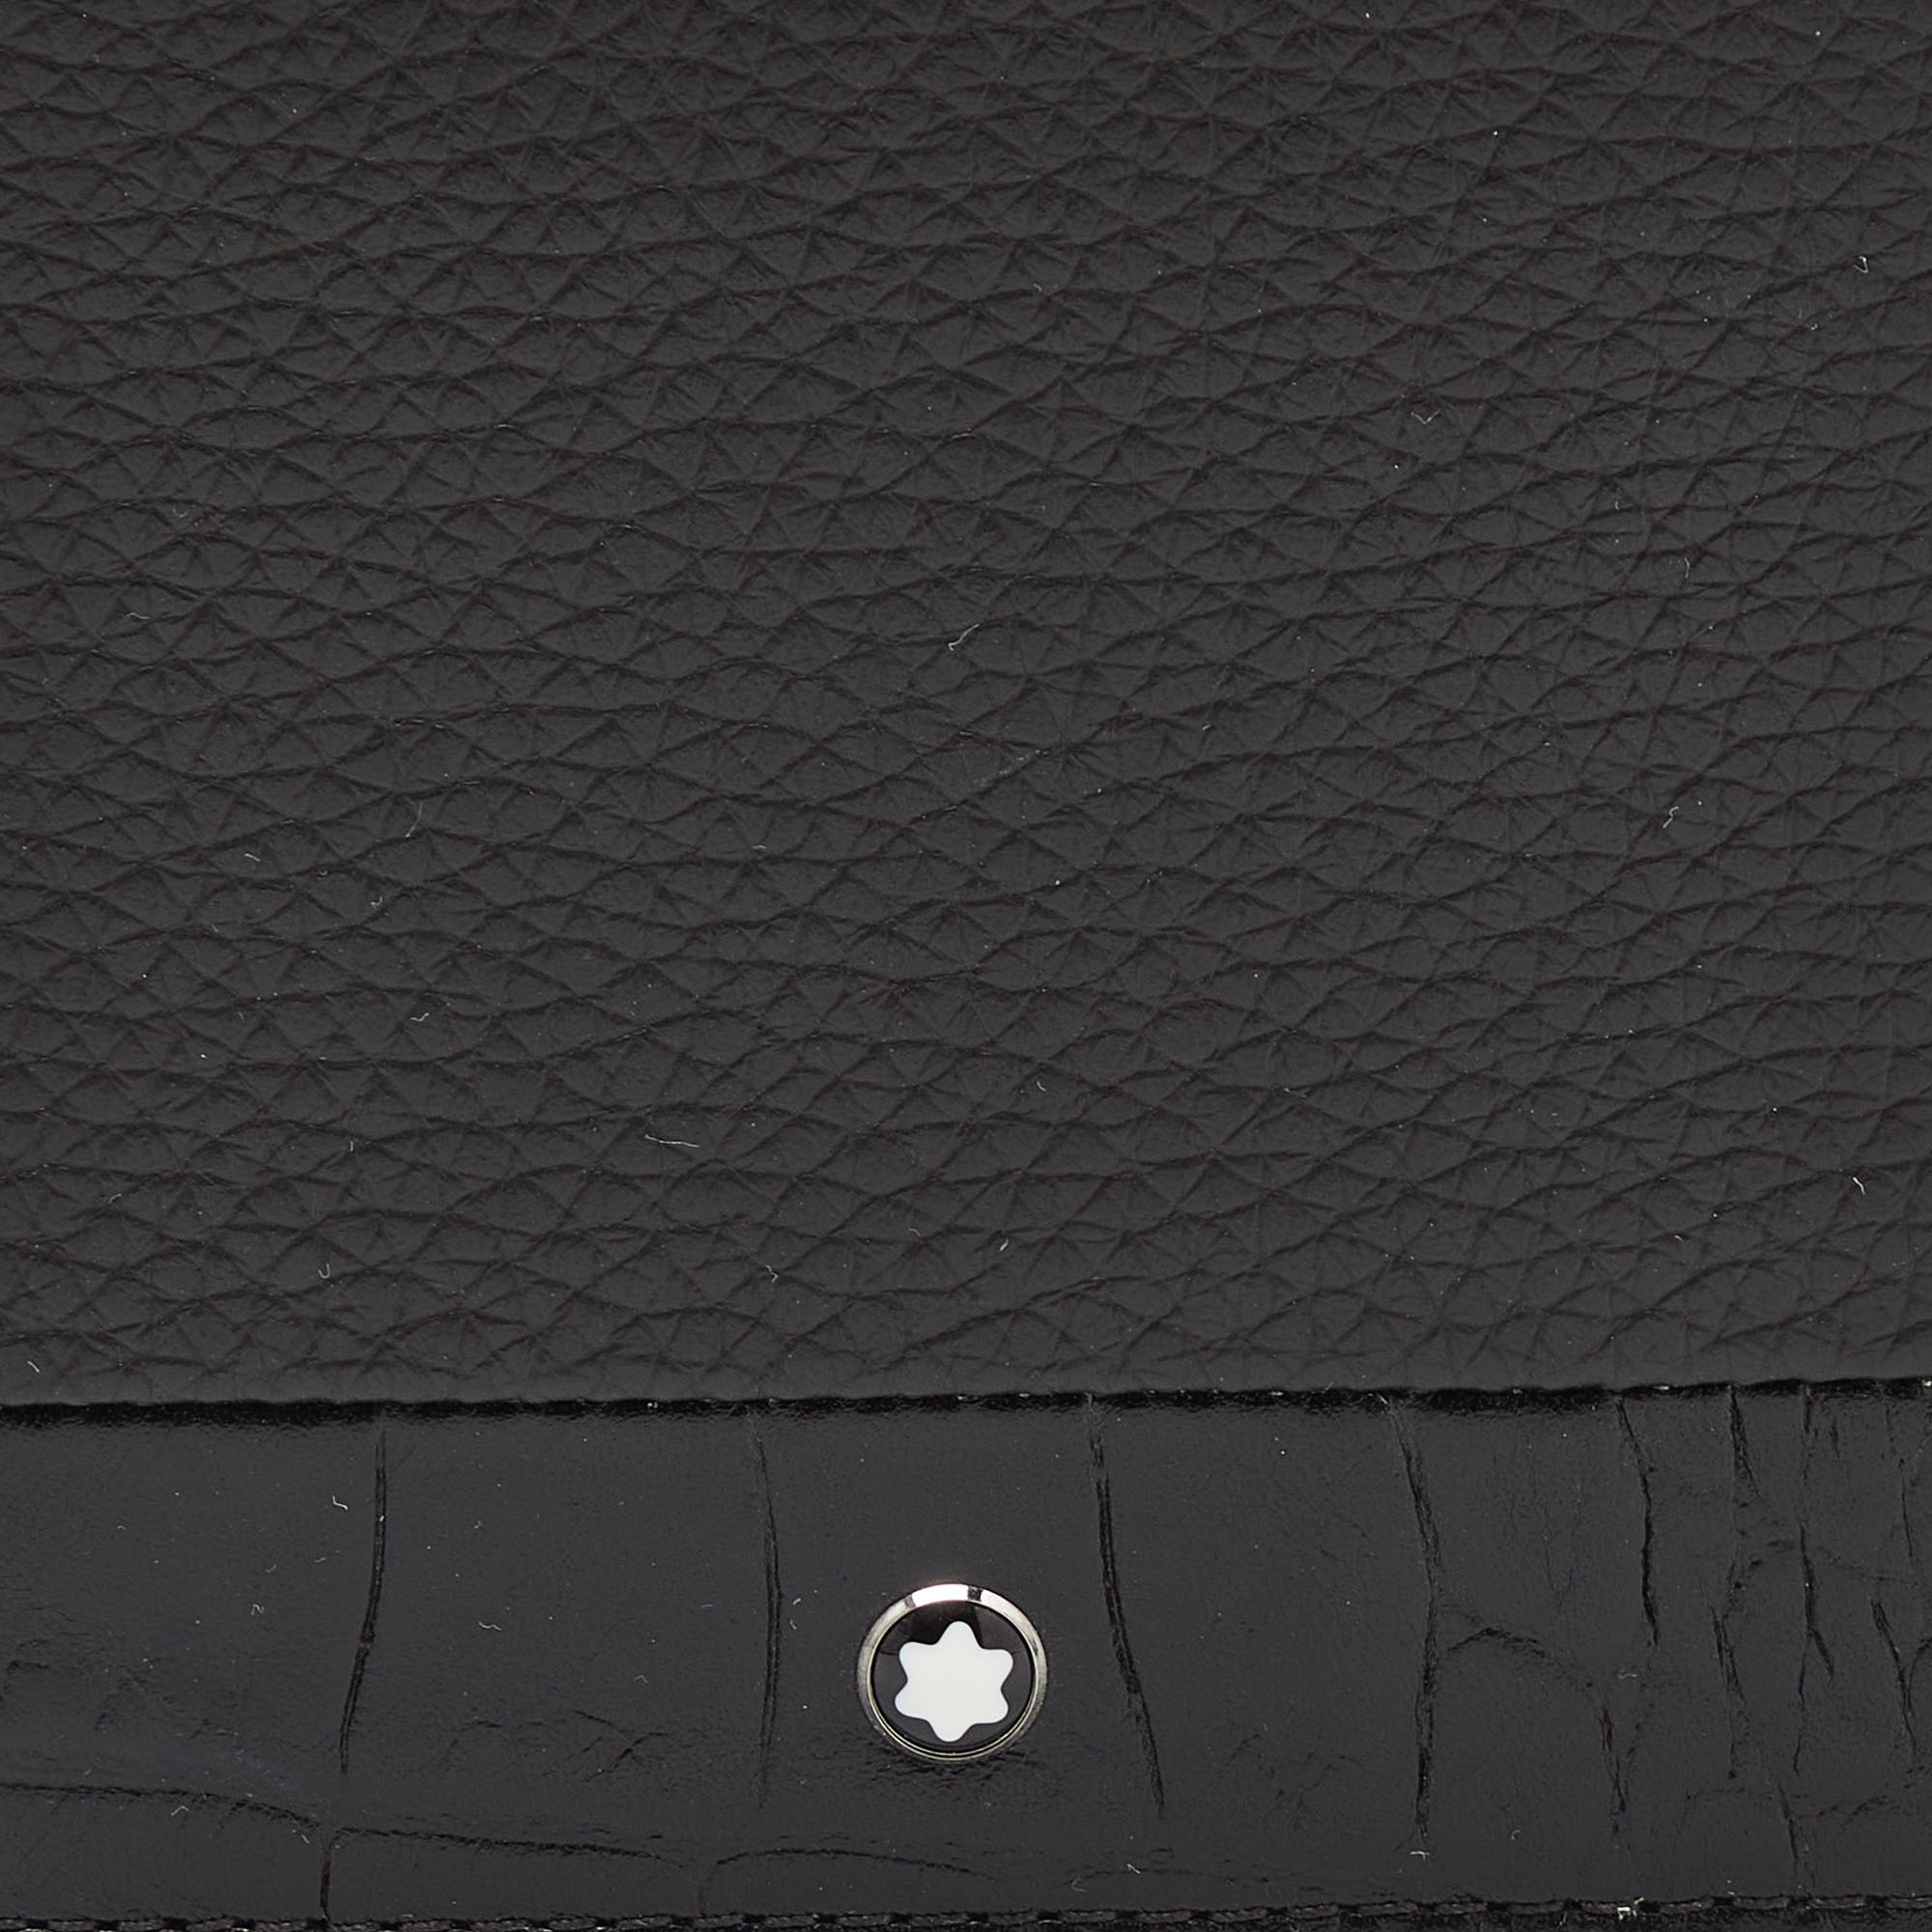 Montblanc Black Crocodile Embossed Leather And Leather Bifold Wallet